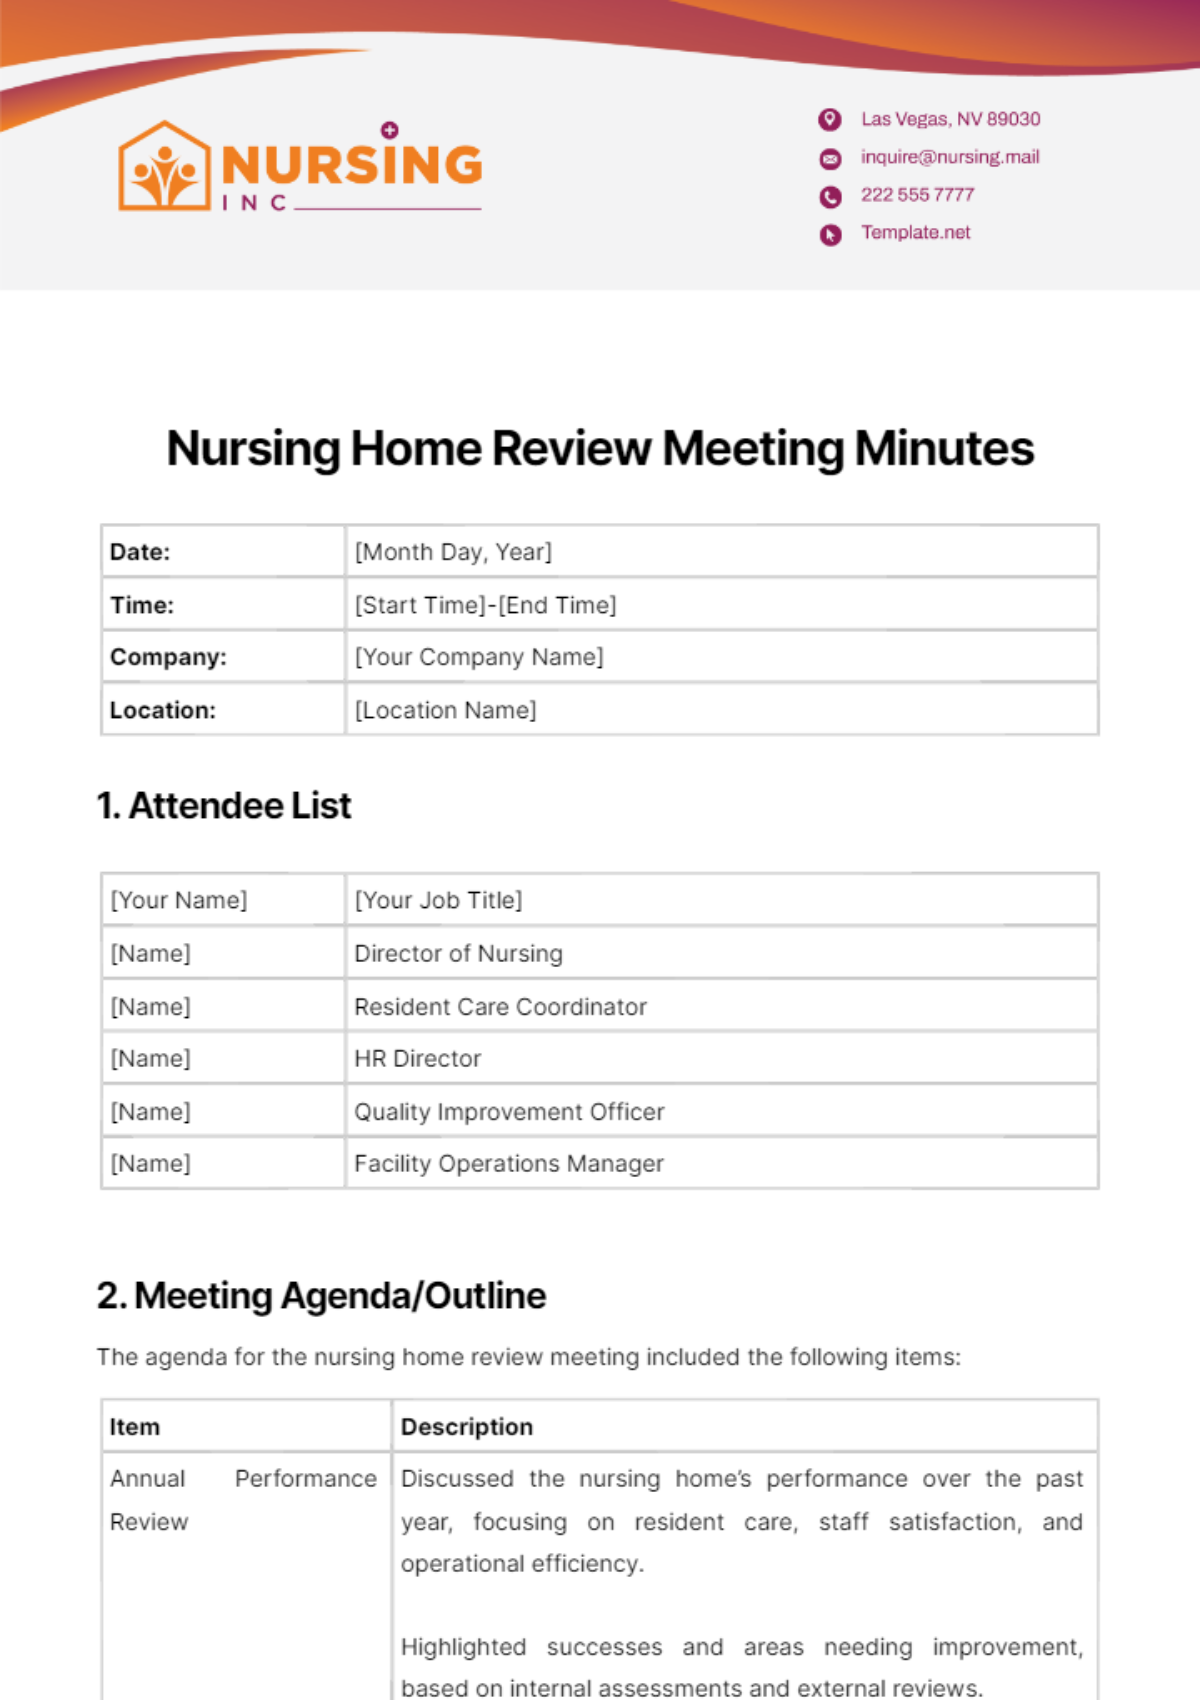 Nursing Home Review Meeting Minutes Template